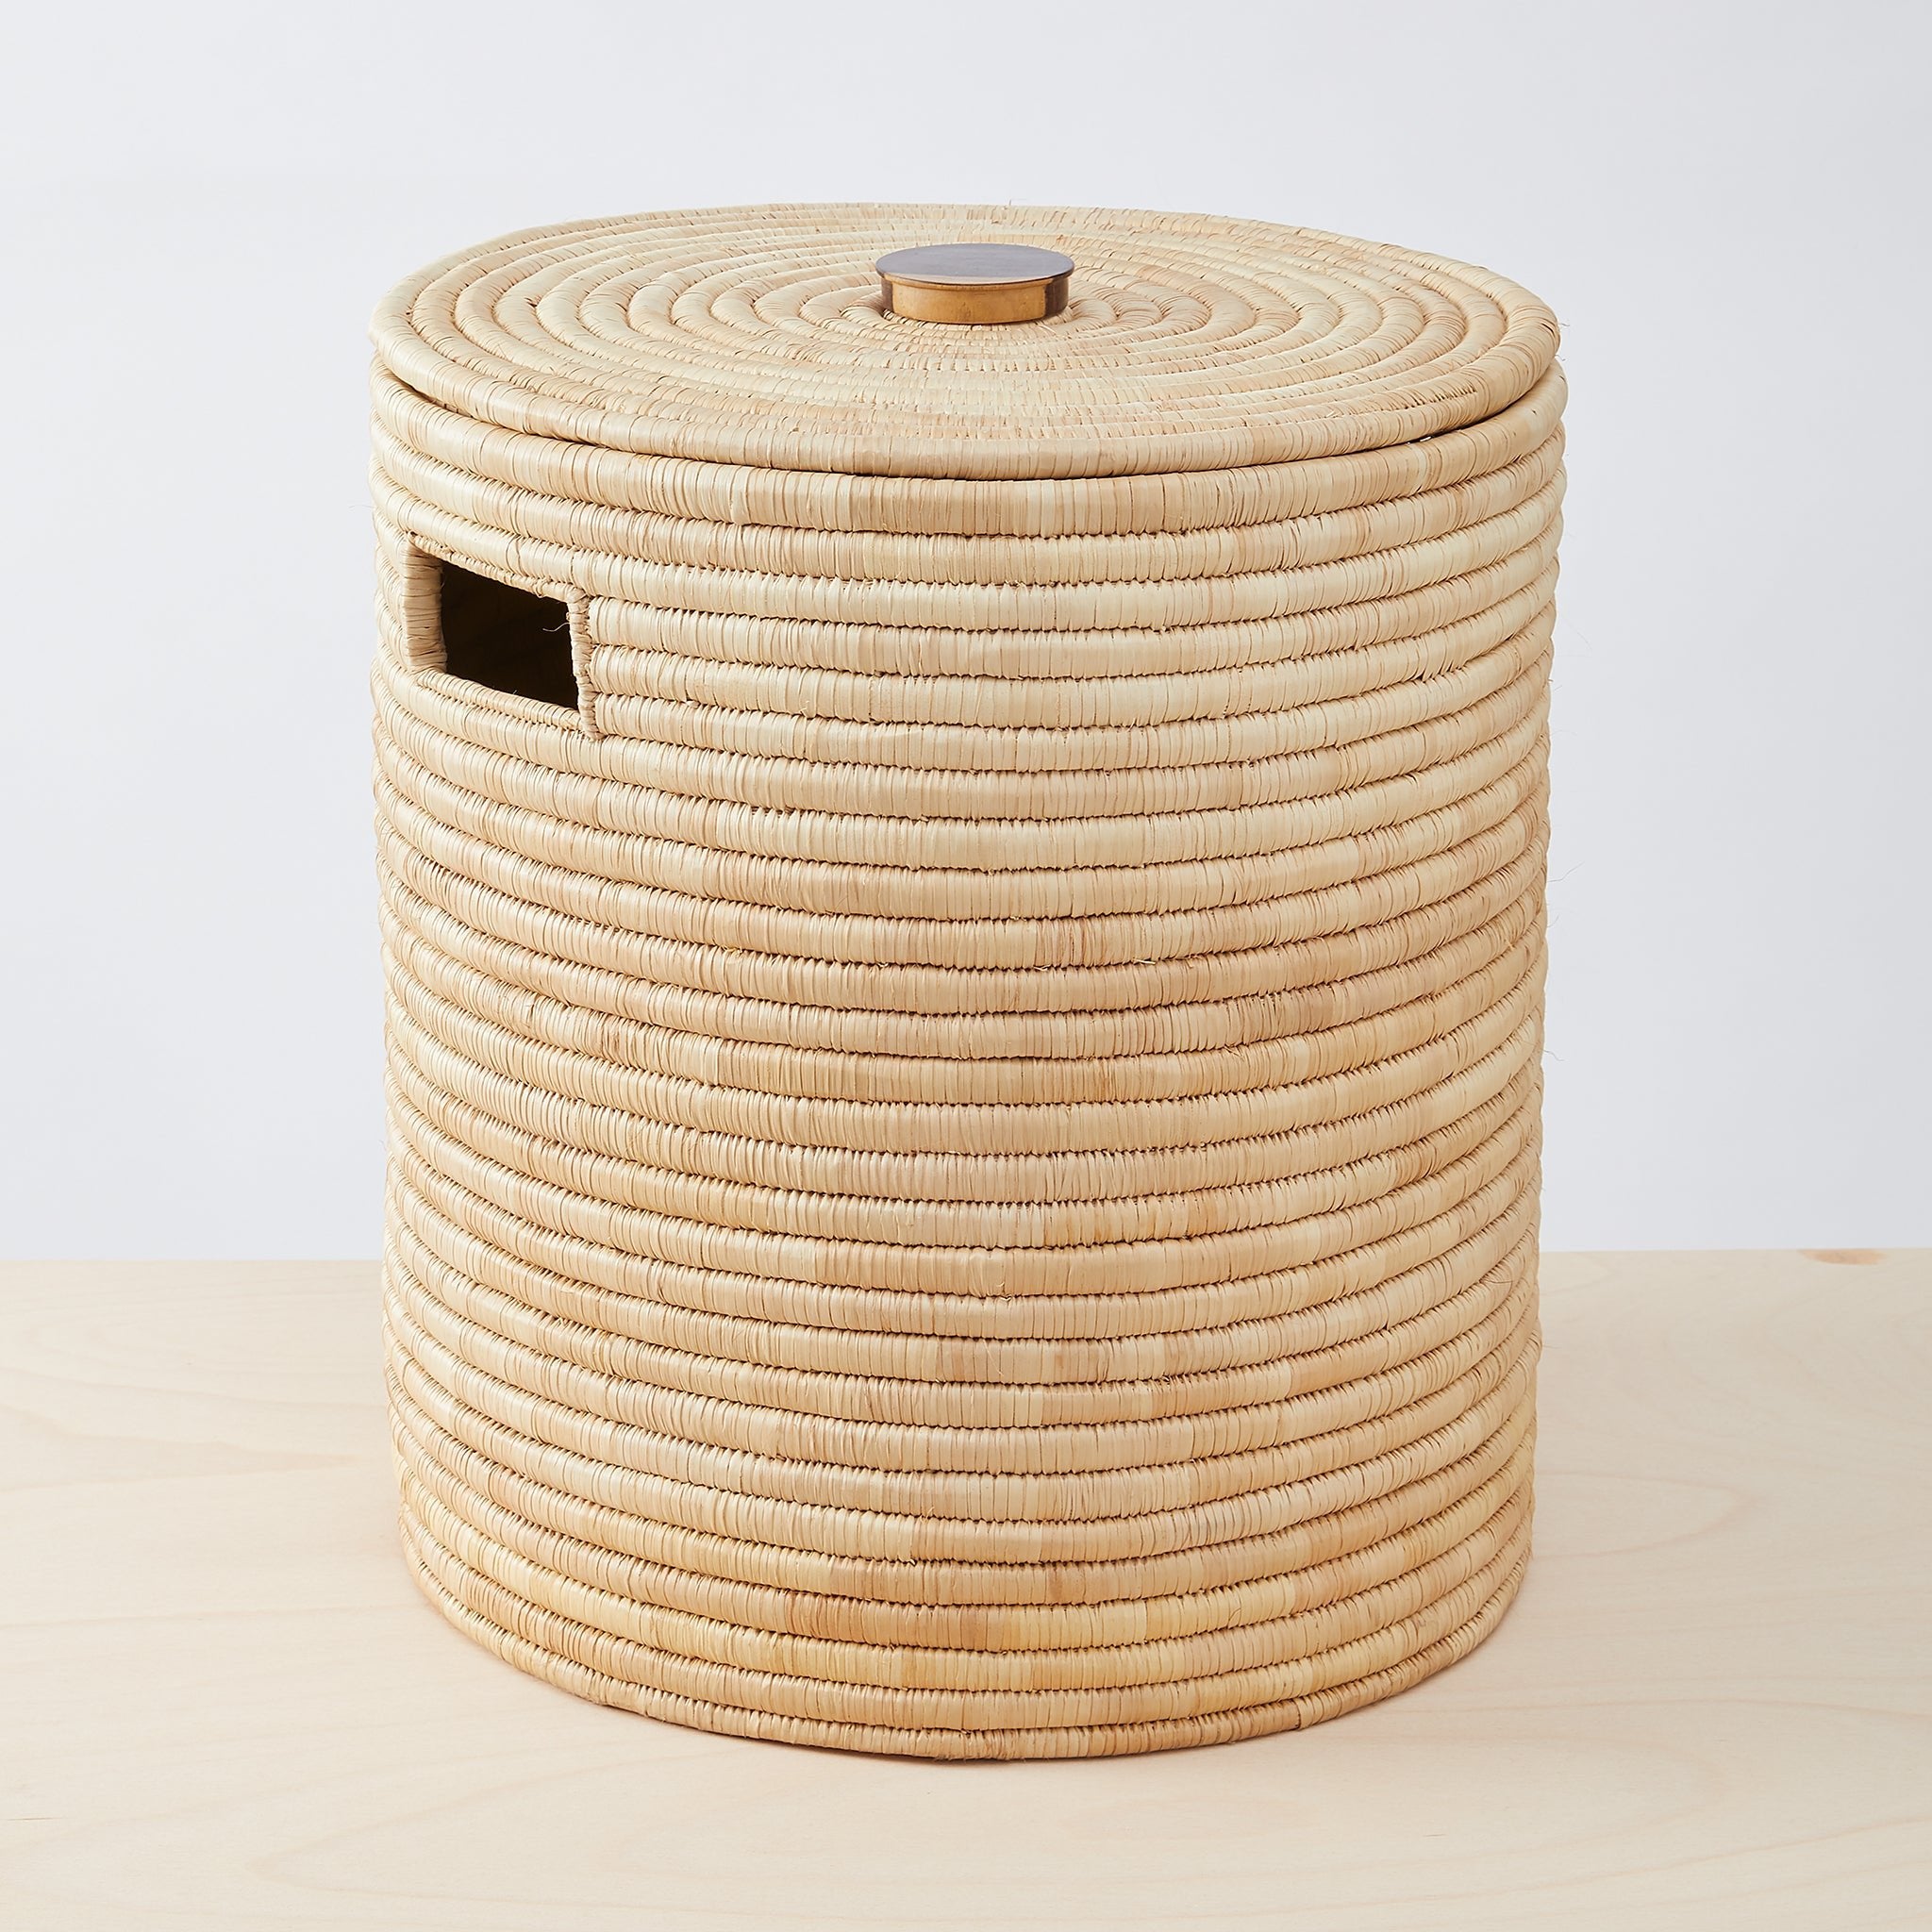 Laundry basket medium with lid and mahogany handle. Carefully and sustainably woven by hand in Malawi. By Native